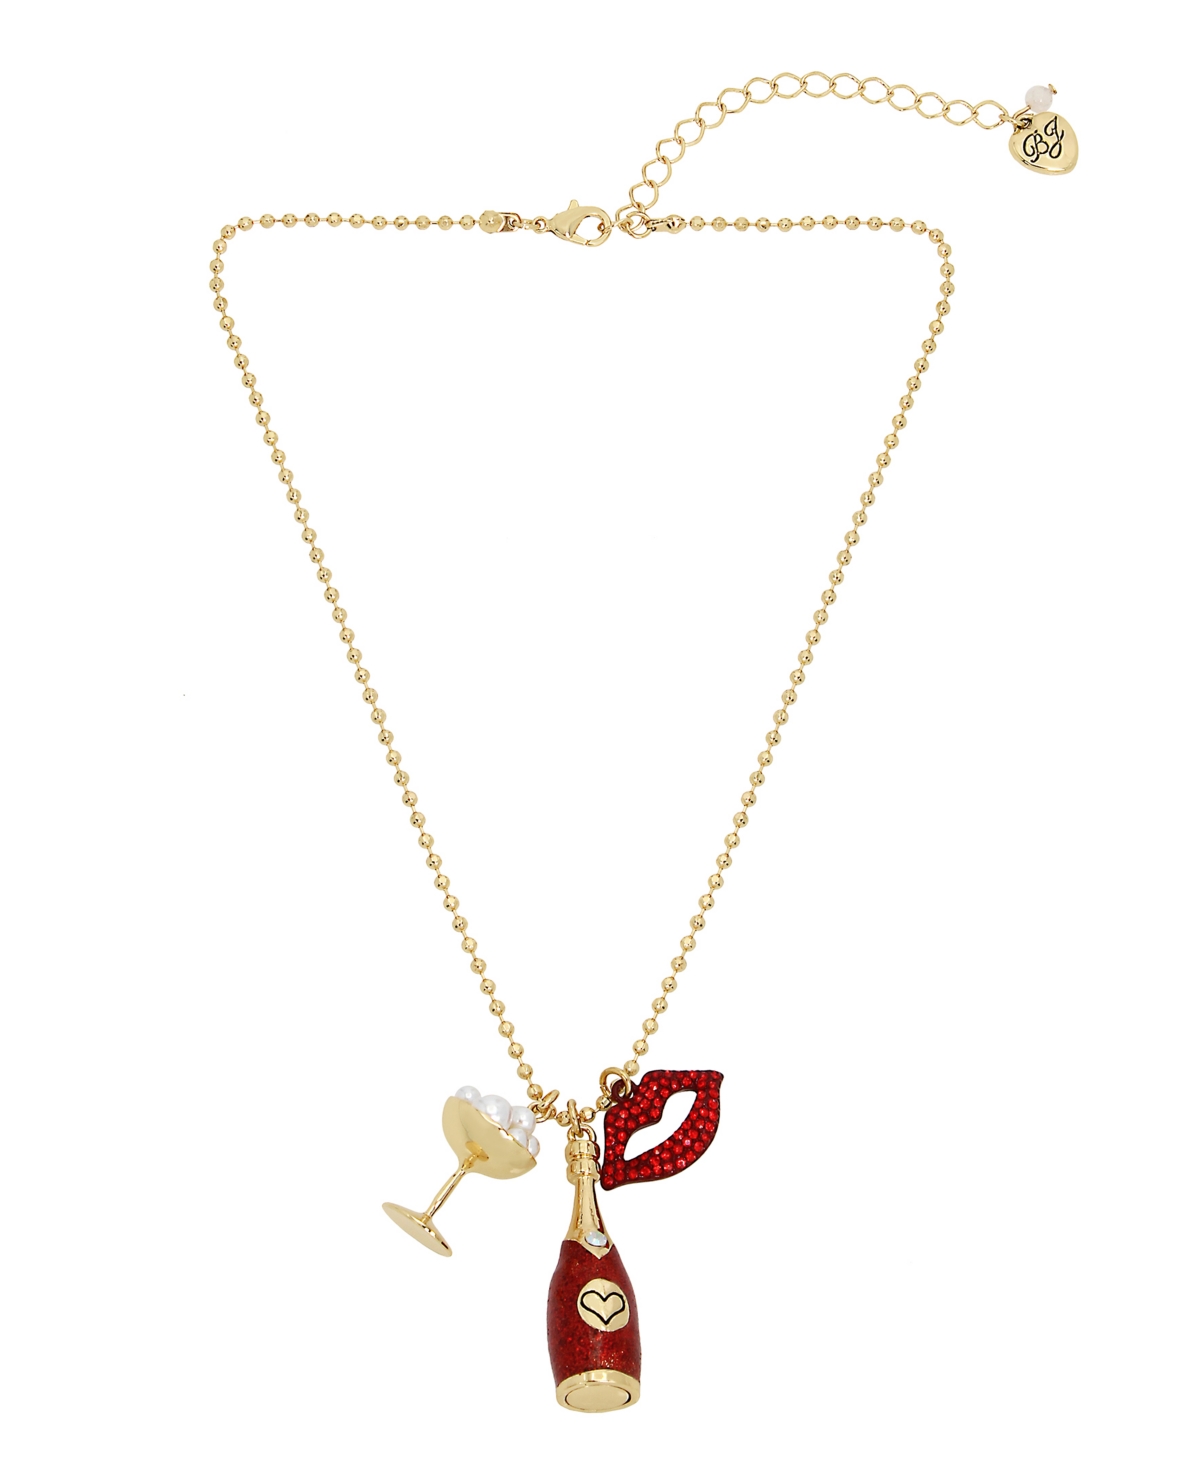 Faux Stone Going All Out Champagne Charm Pendant Necklace - Red, Gold